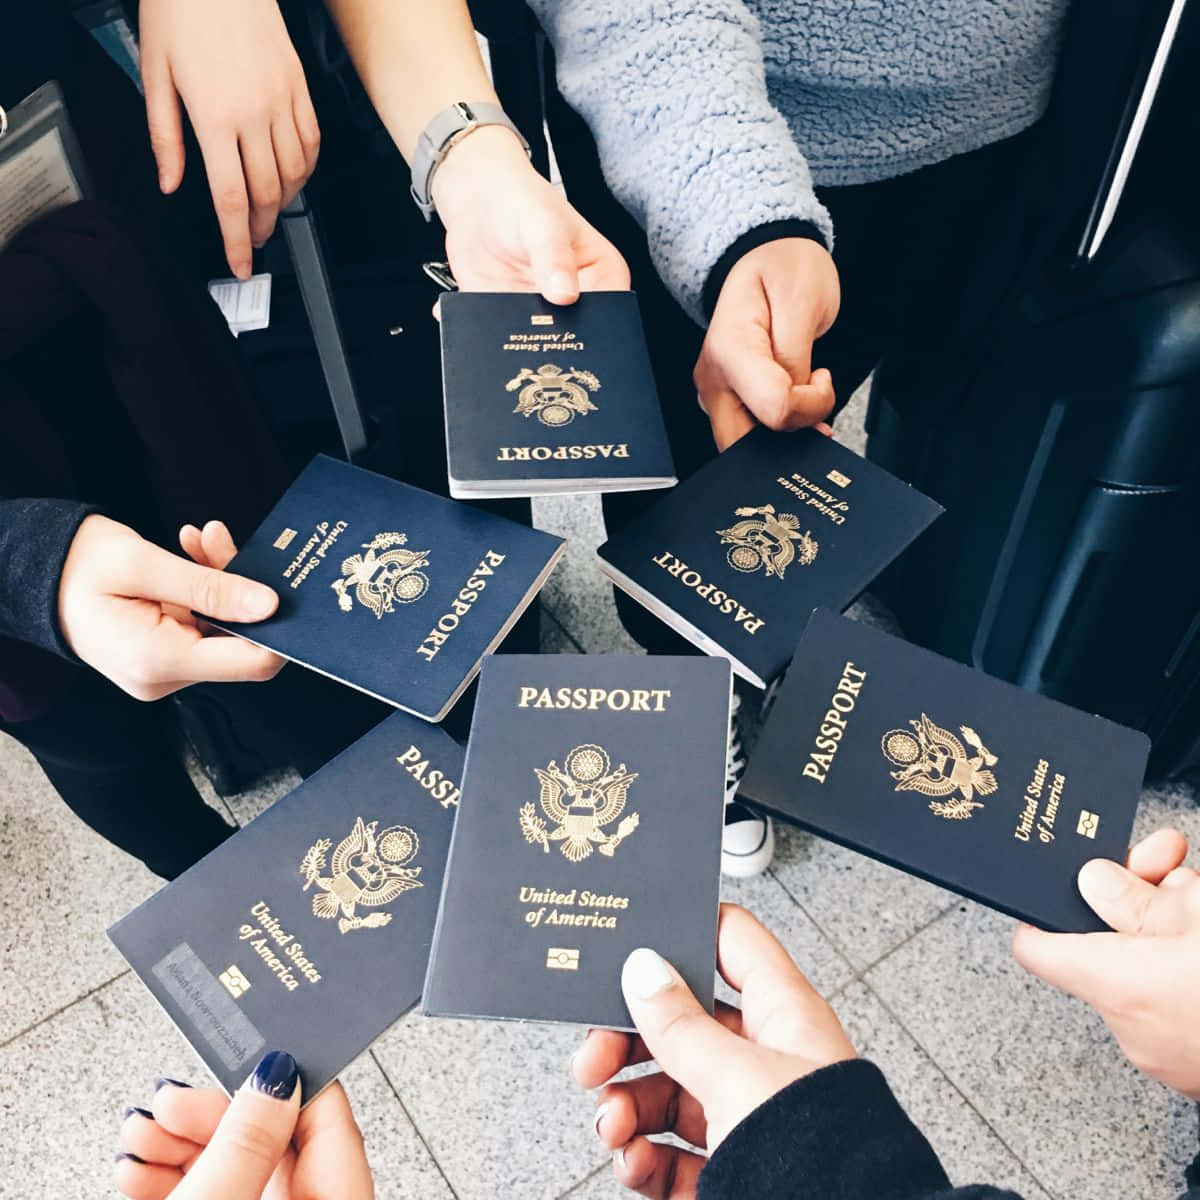 A Group Of People Holding Passports Together